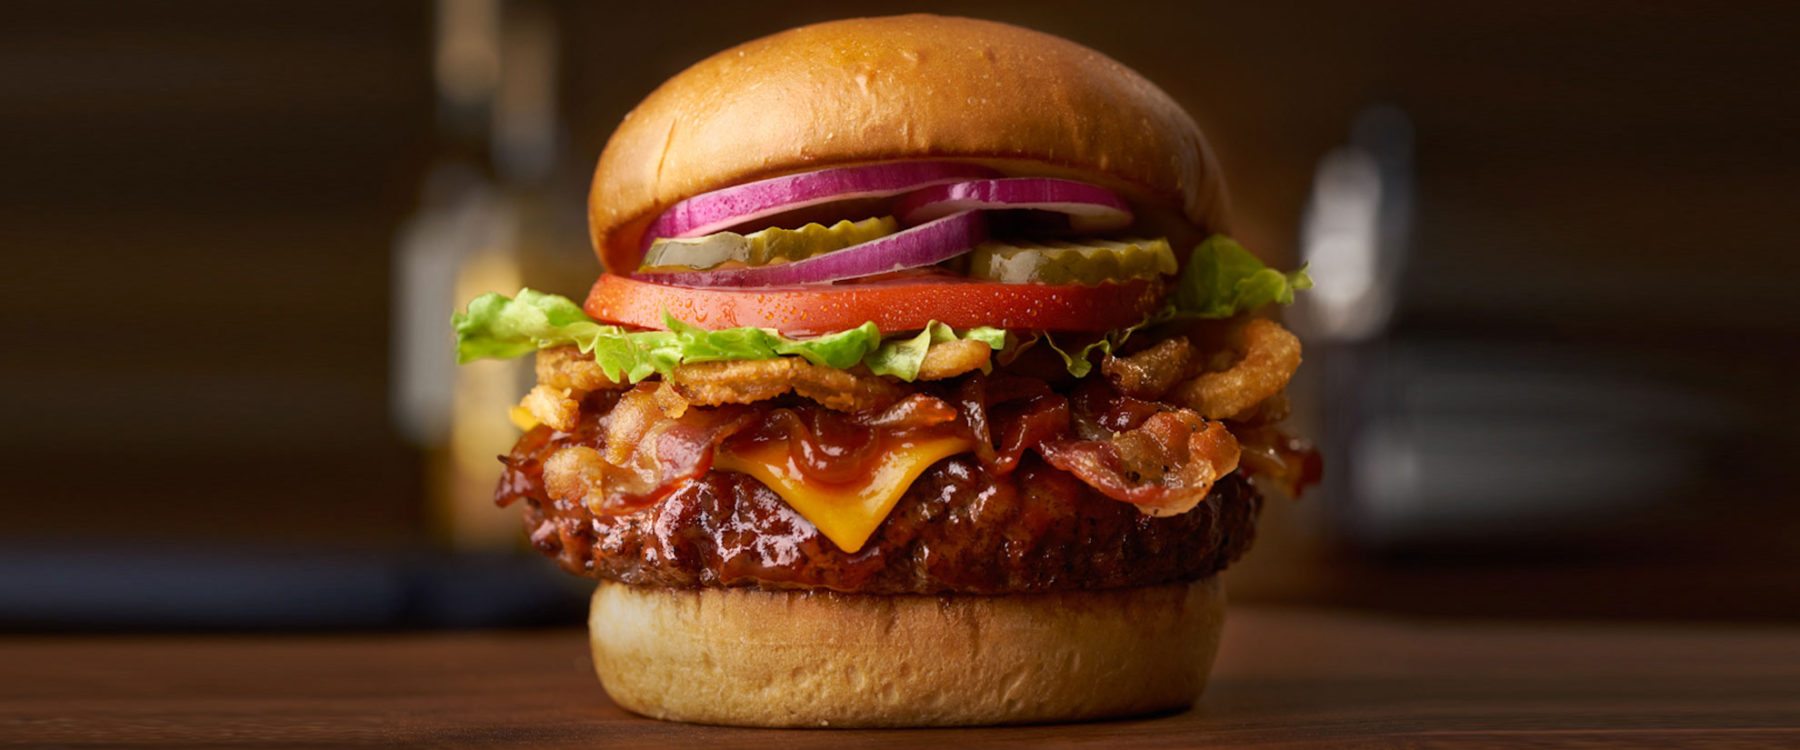 Here's Who Just Picked Up Red Robin Gourmet Burgers Inc ... - Small Cap Exclusive (press release)